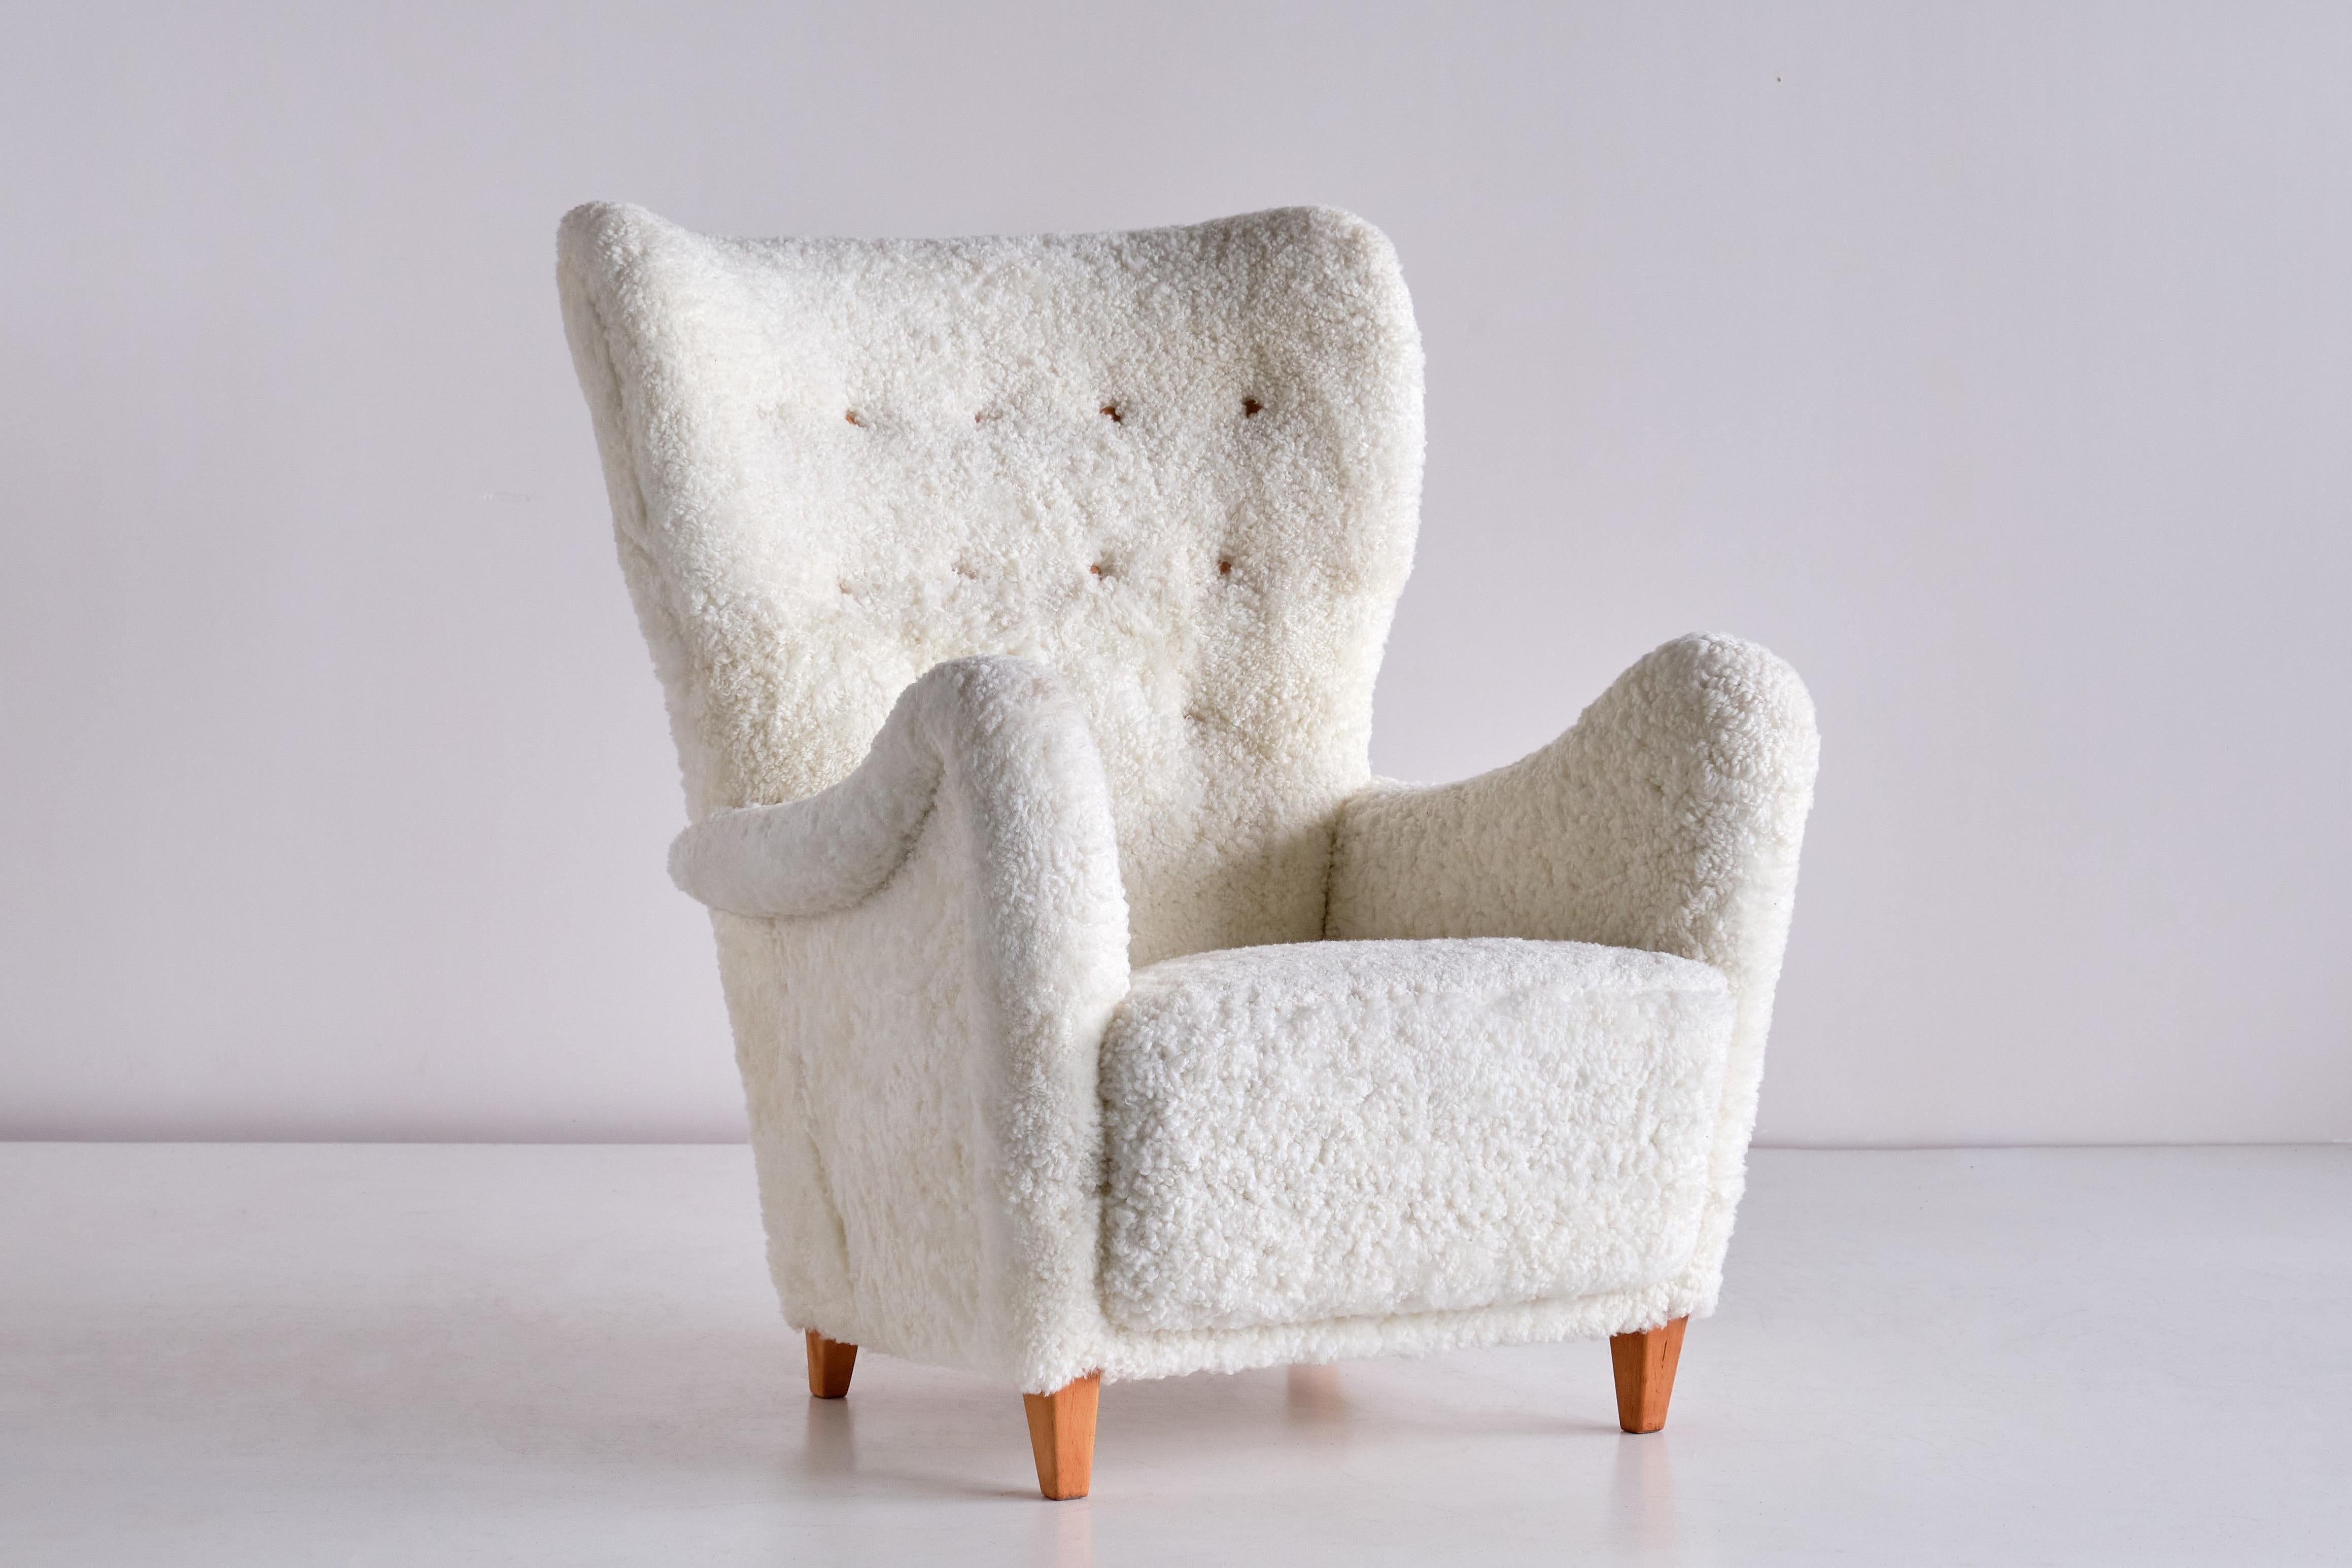 Otto Schulz Armchair in White Sheepskin and Beech, Boet, Sweden, 1940s For Sale 5